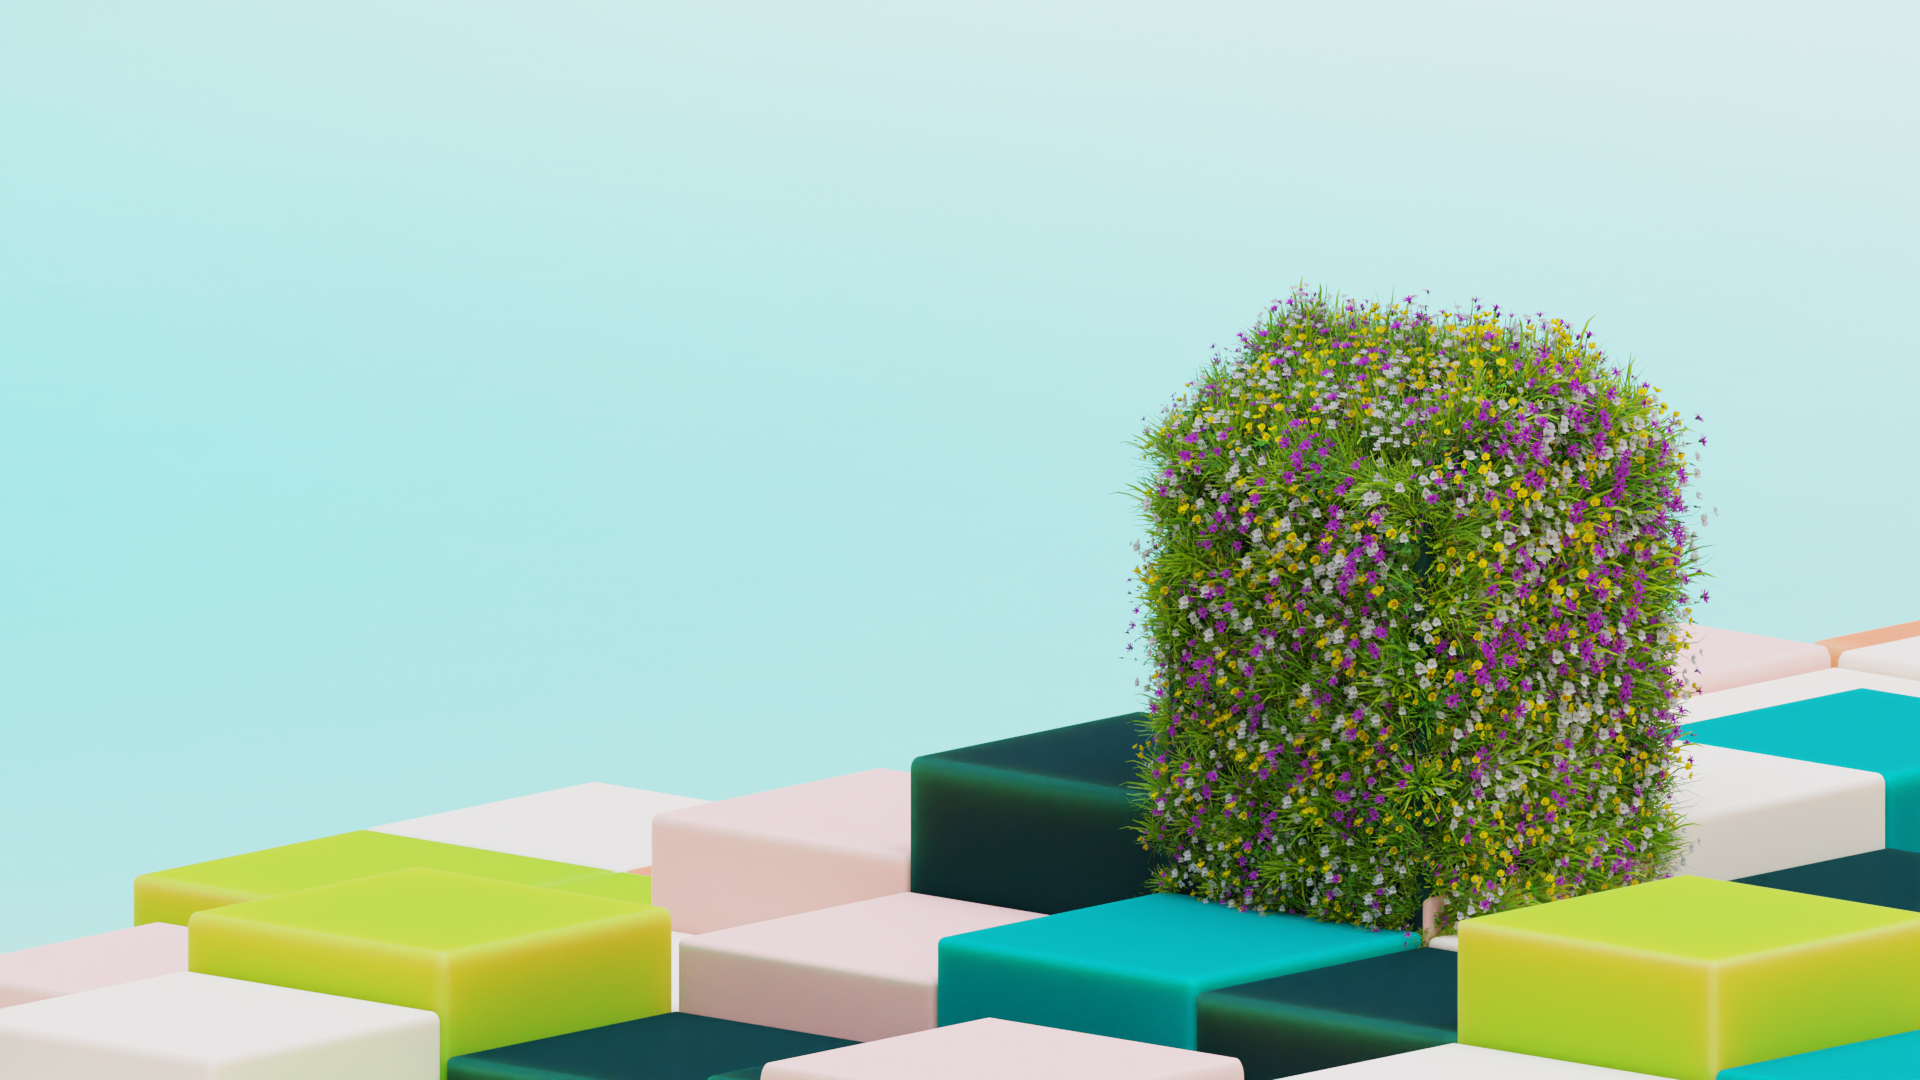 &why: abstract 3D scene with colorful cubes and house that is grown over with grass